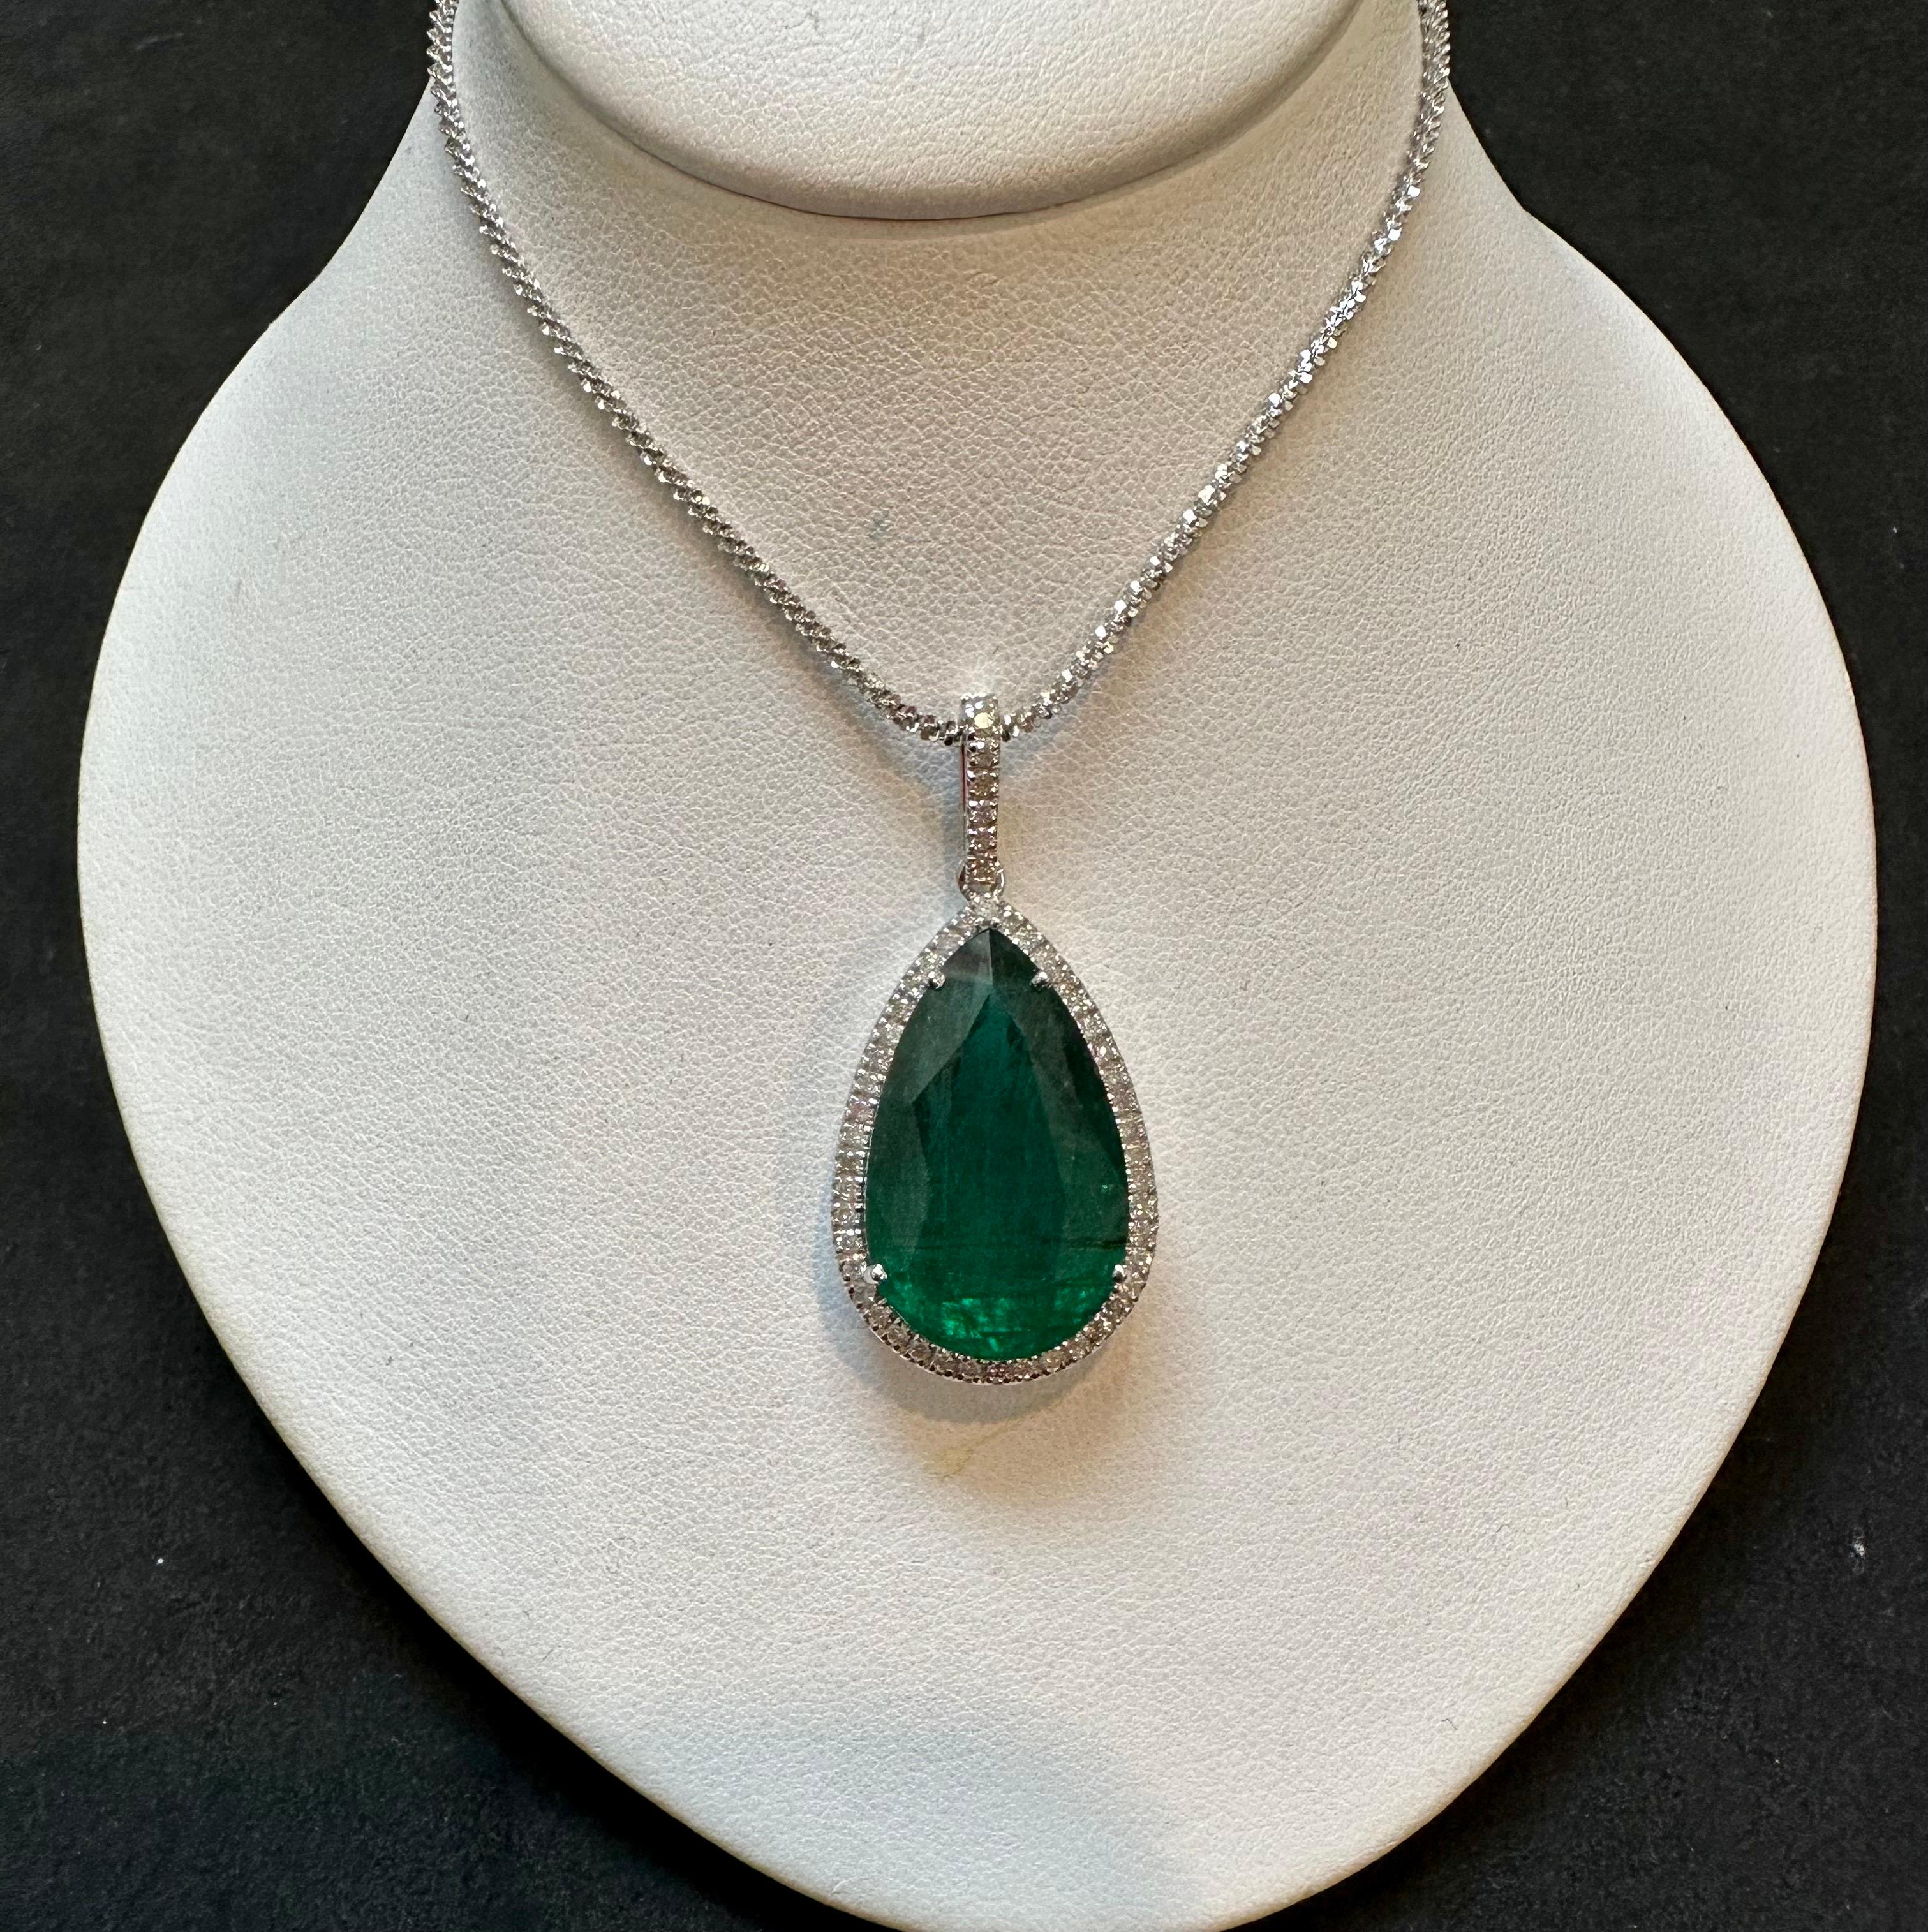 
known weight of 18.76 Ct Pear Cut Emerald & 1 Ct Diamond Halo Pendent/Necklace 14 Kt White Gold Chain 23 